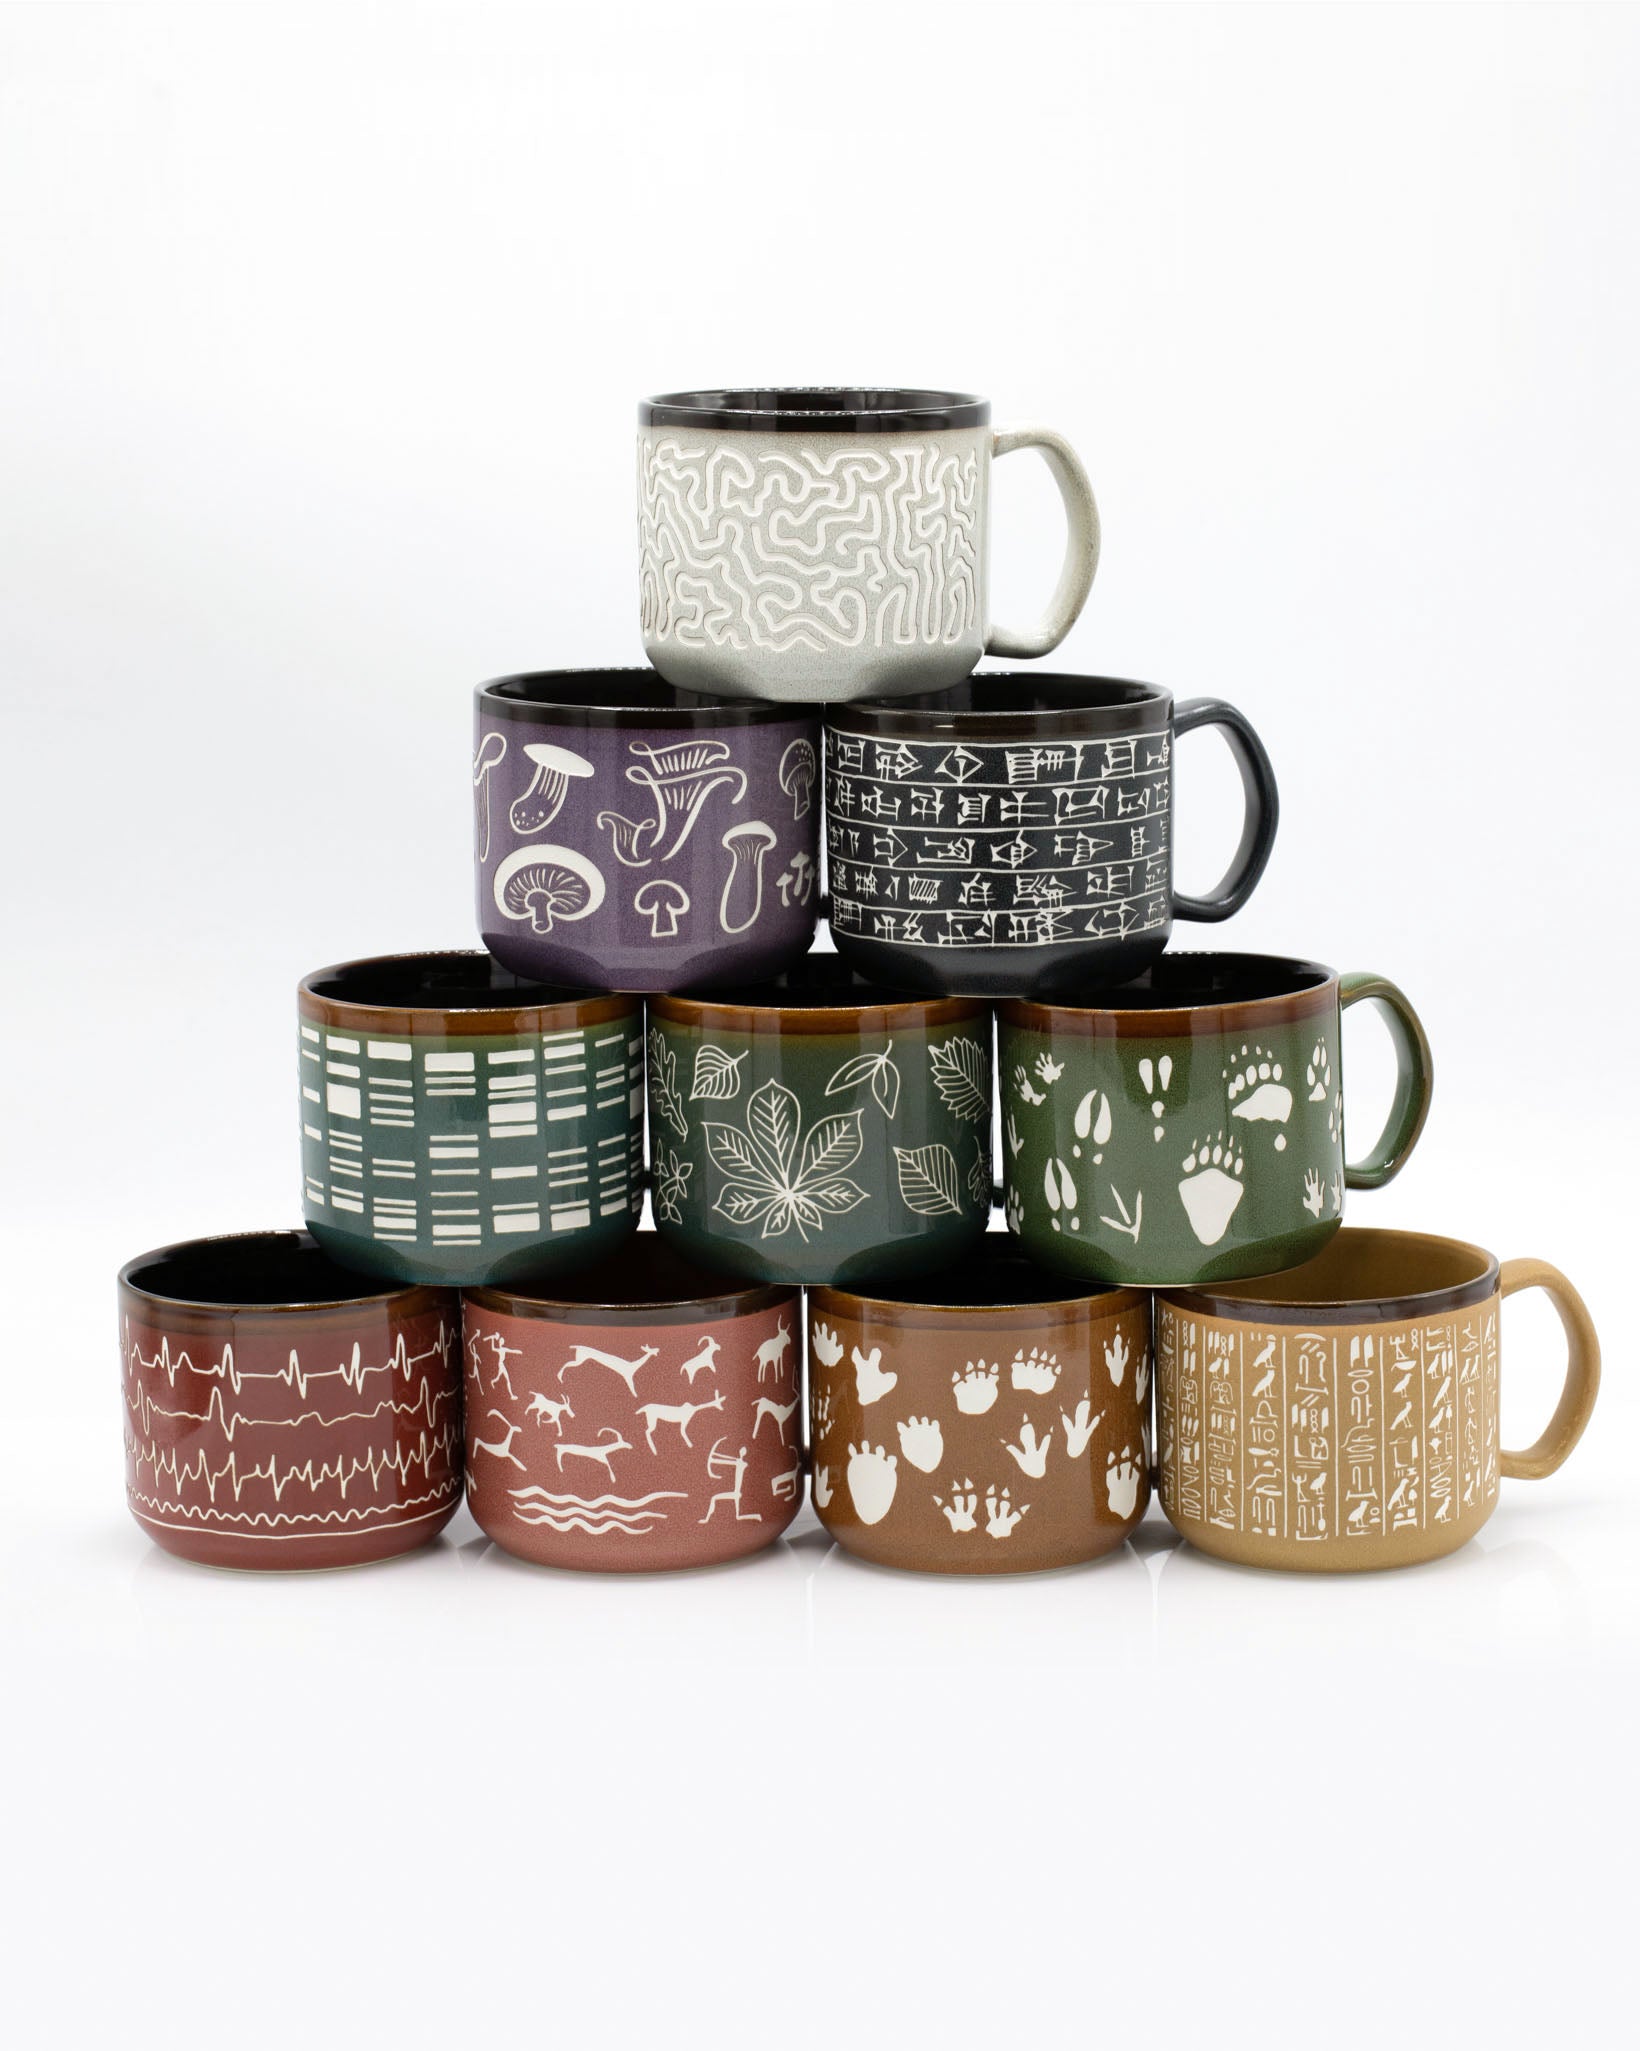 A stack of Hand Carved 15 oz Ceramic Mugs by Cognitive Surplus with different designs on them.